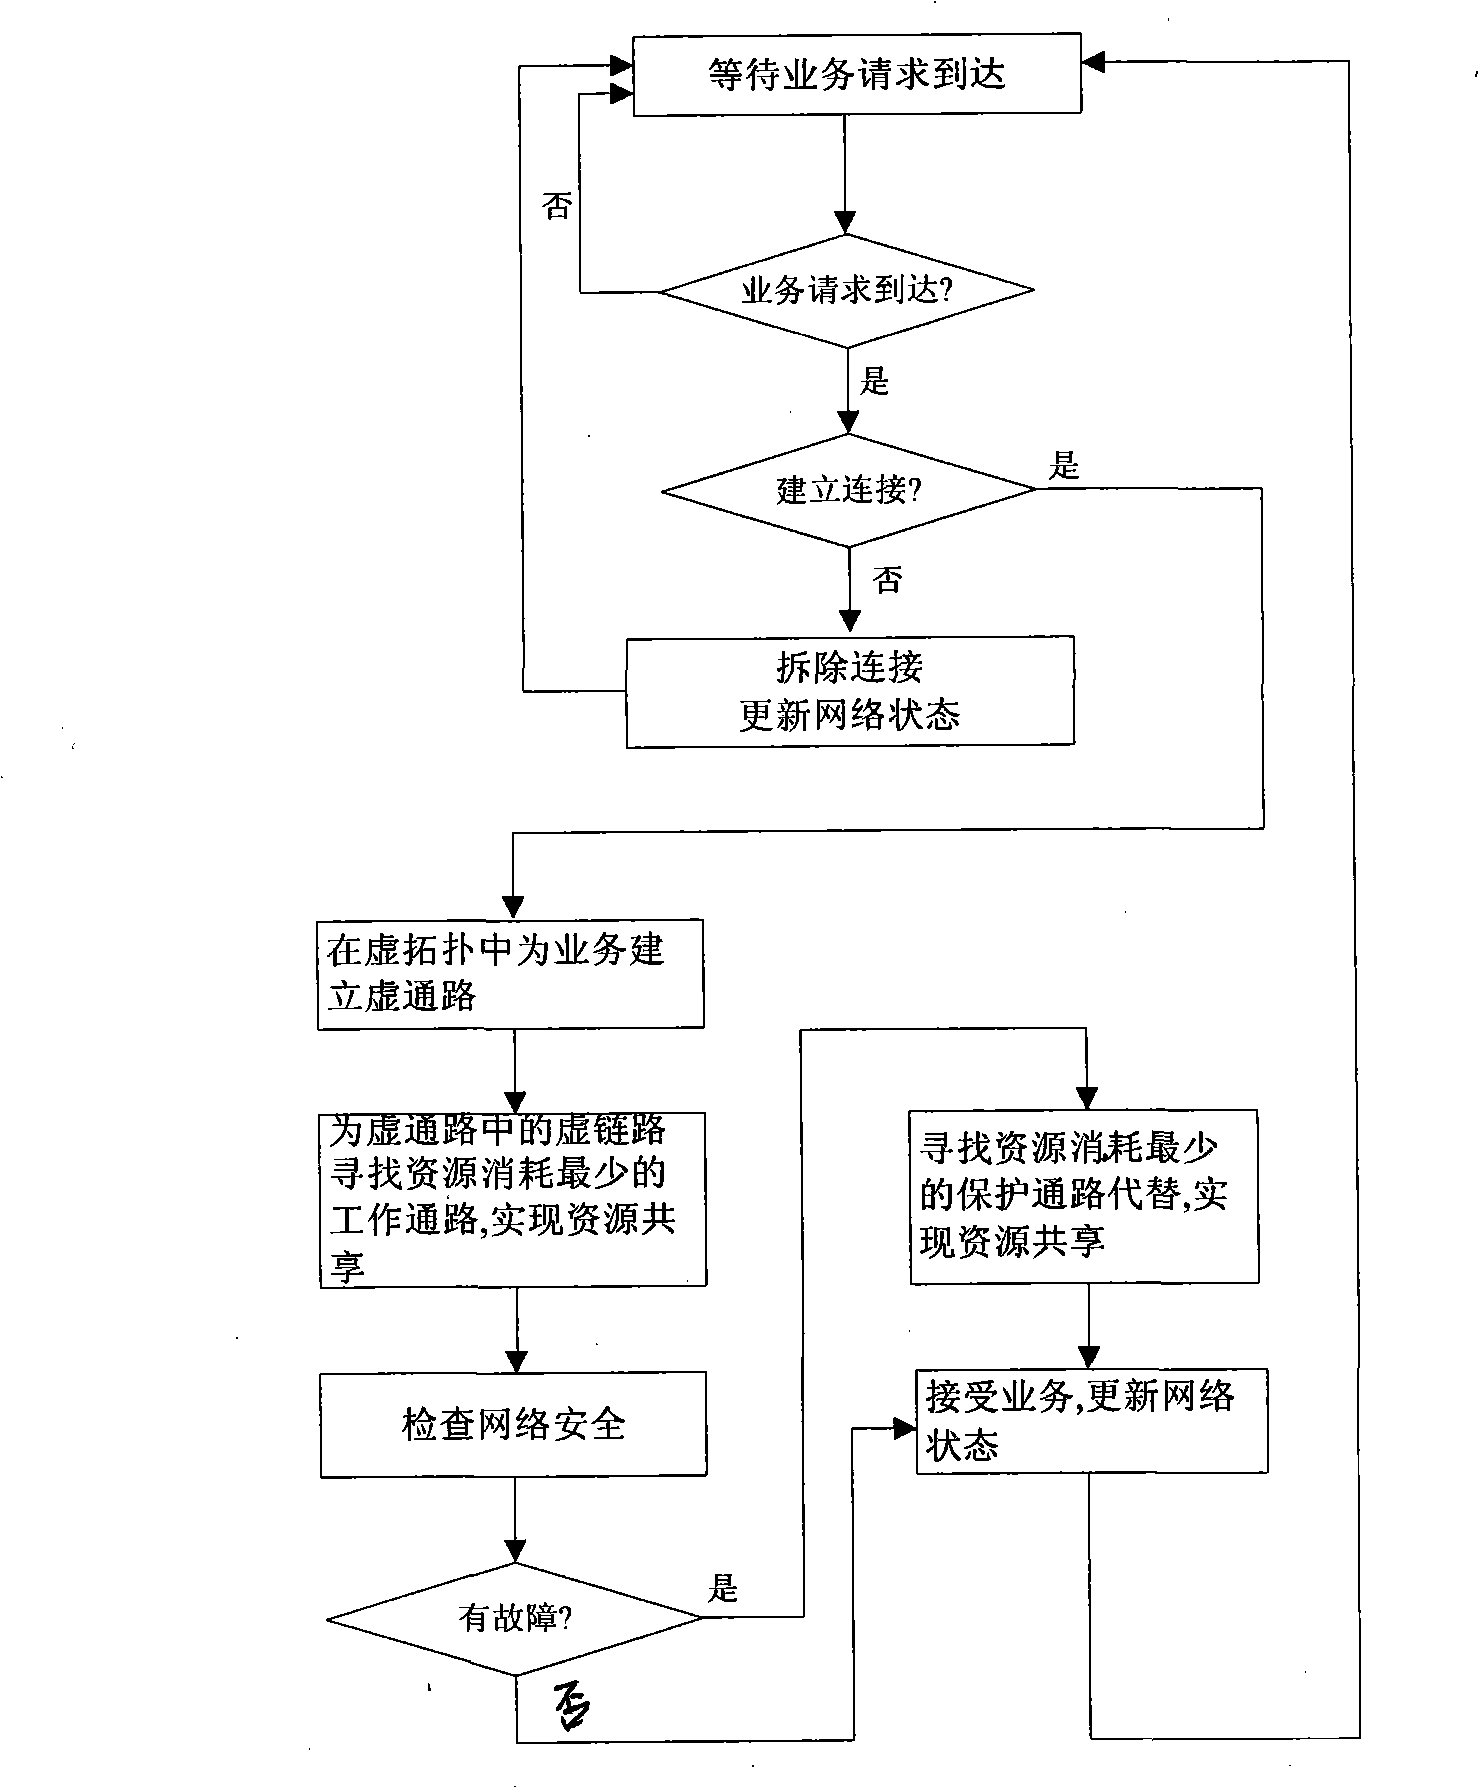 Method for protecting sub-path when single link is fault in a WDM network